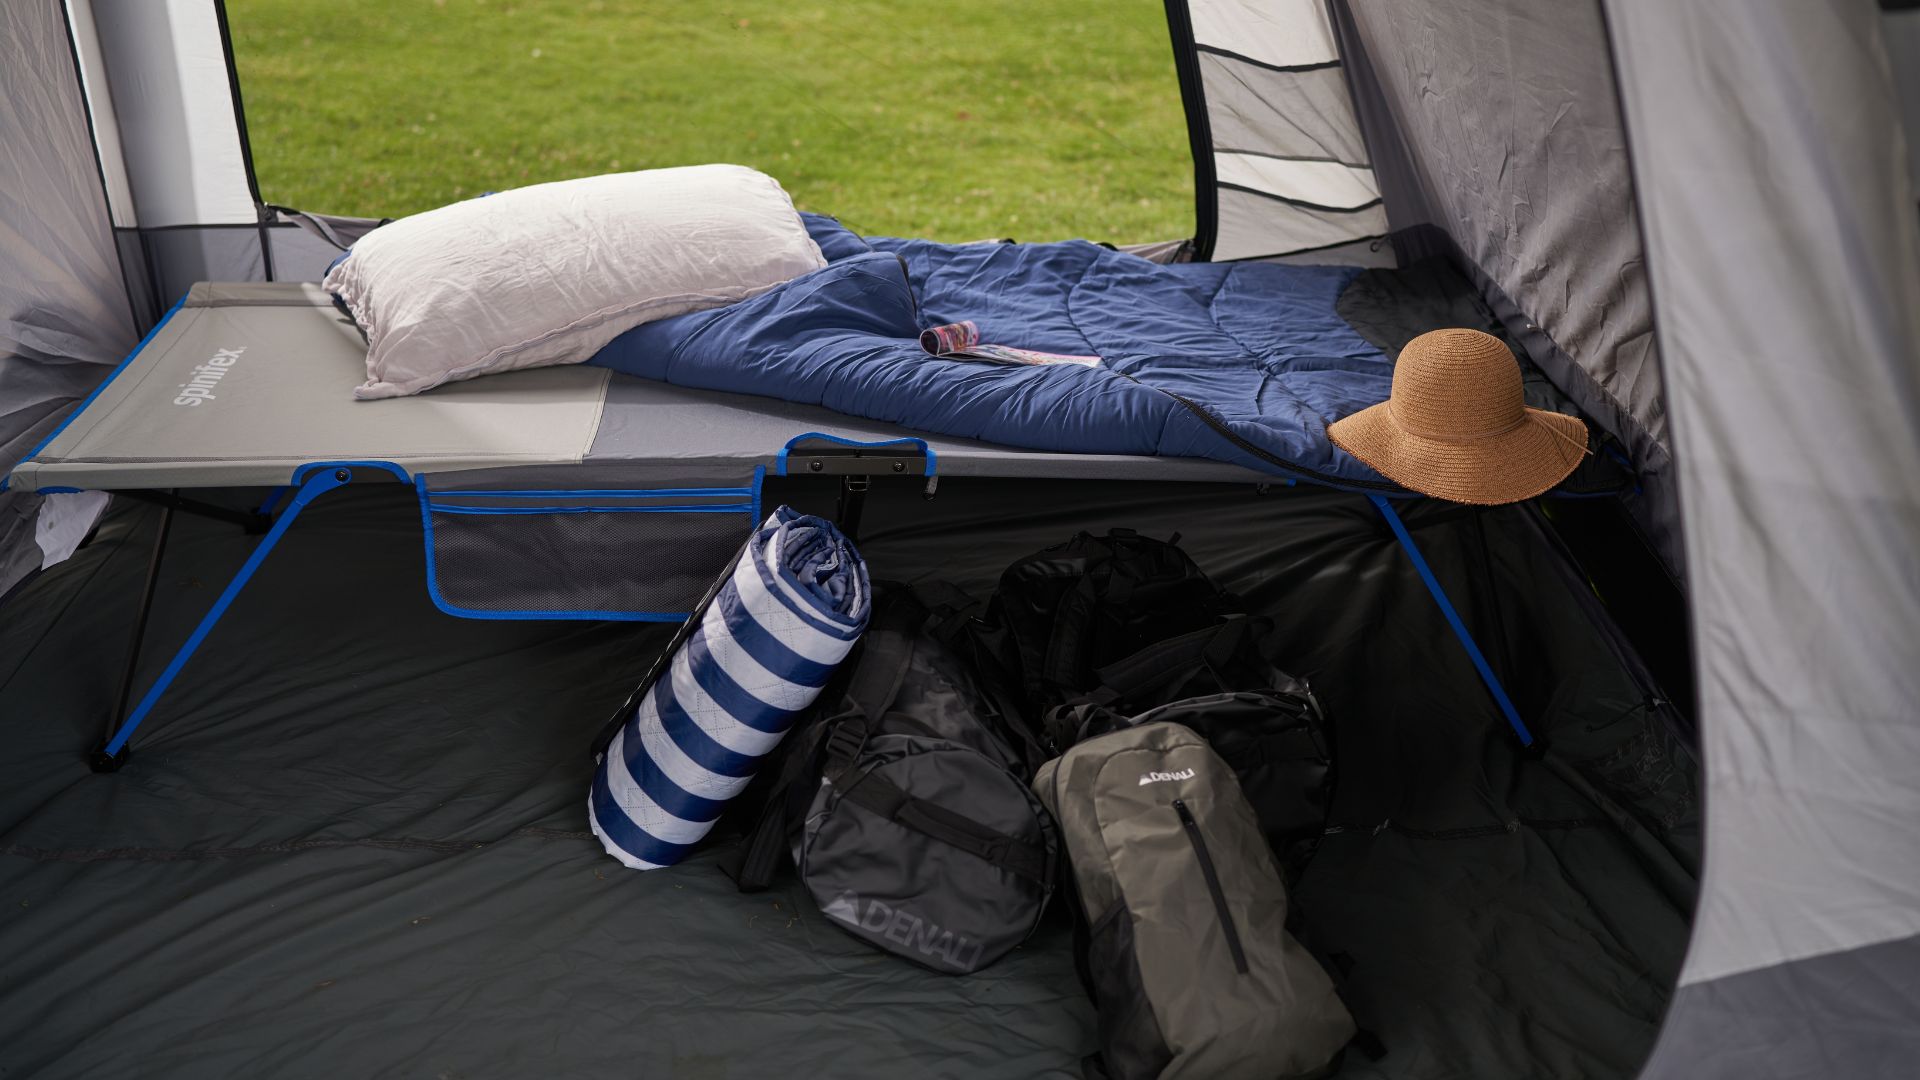 Camping tent set up with elevated bed and sleeping equipment